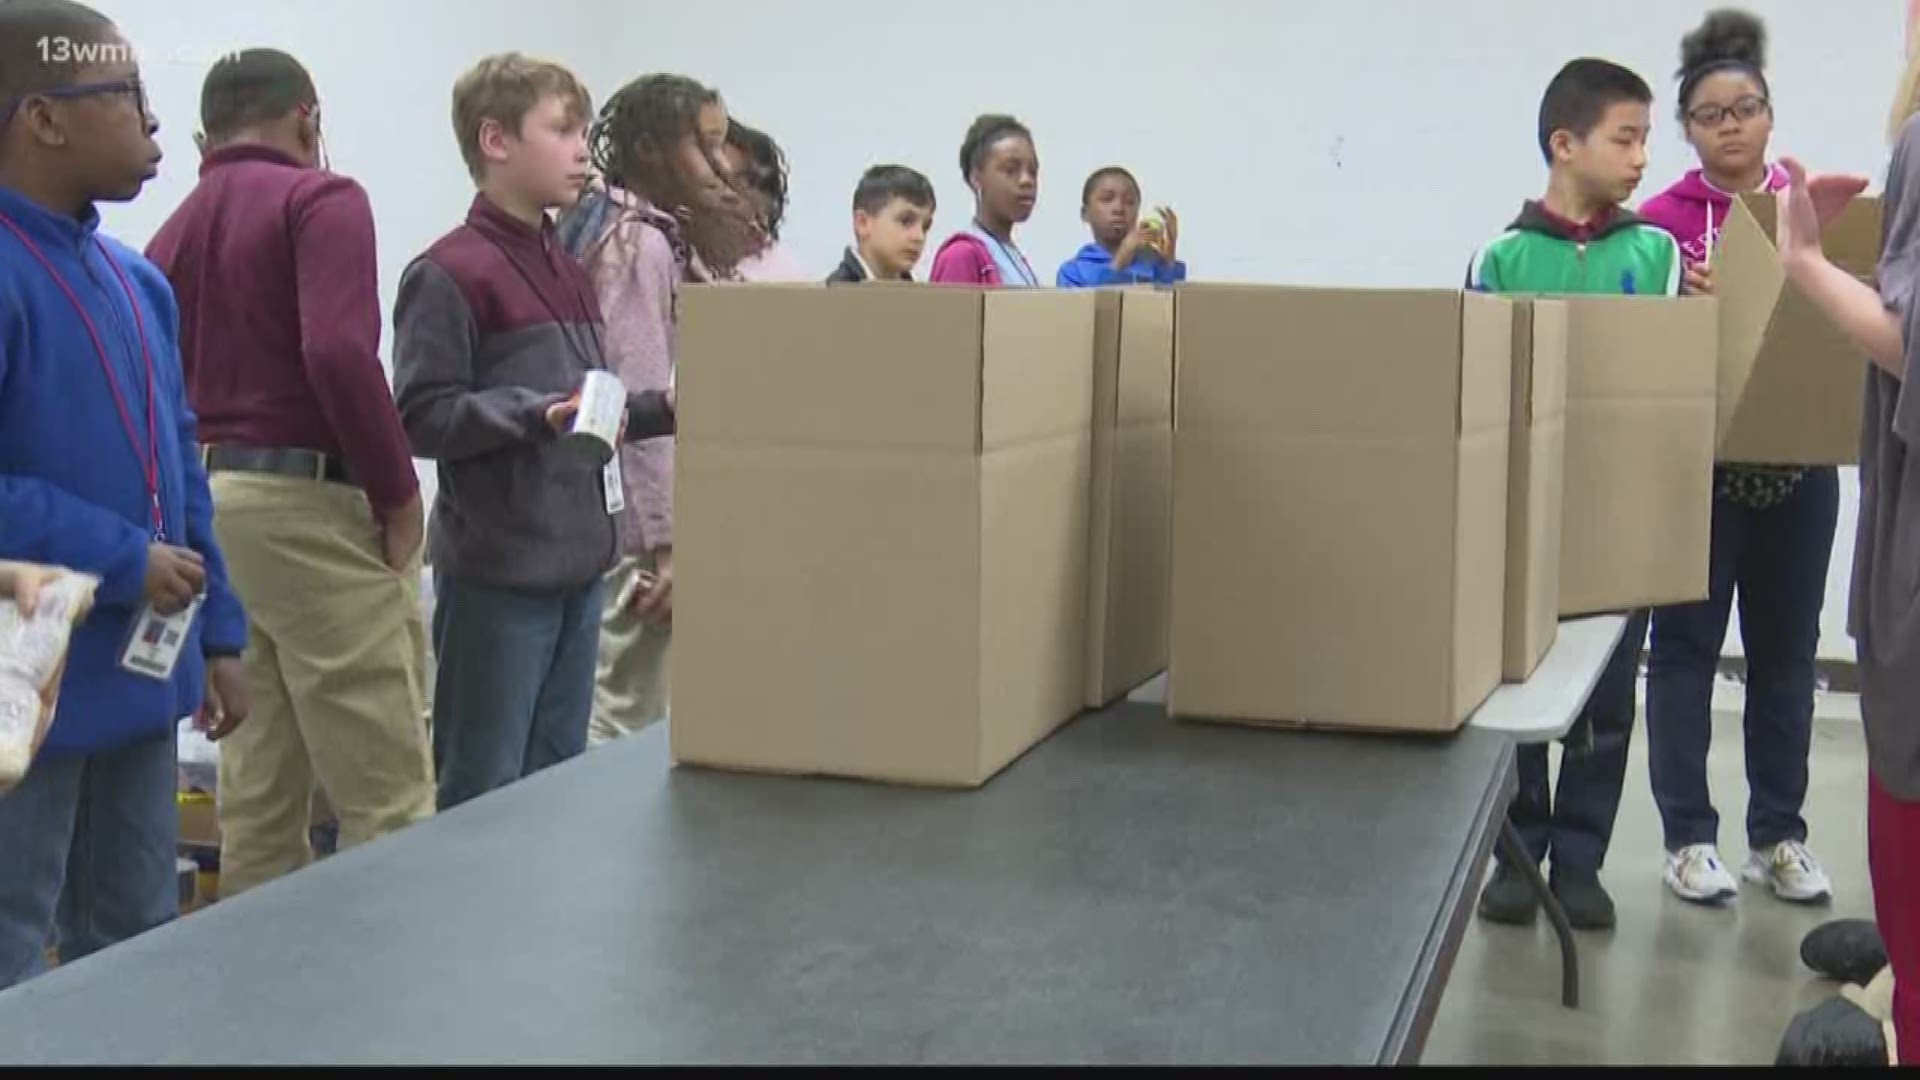 Around 30 gifted students from Carter, Union, and Lane Elementary exchanged their pencils and papers to pack more than a dozen boxes of food on a field trip